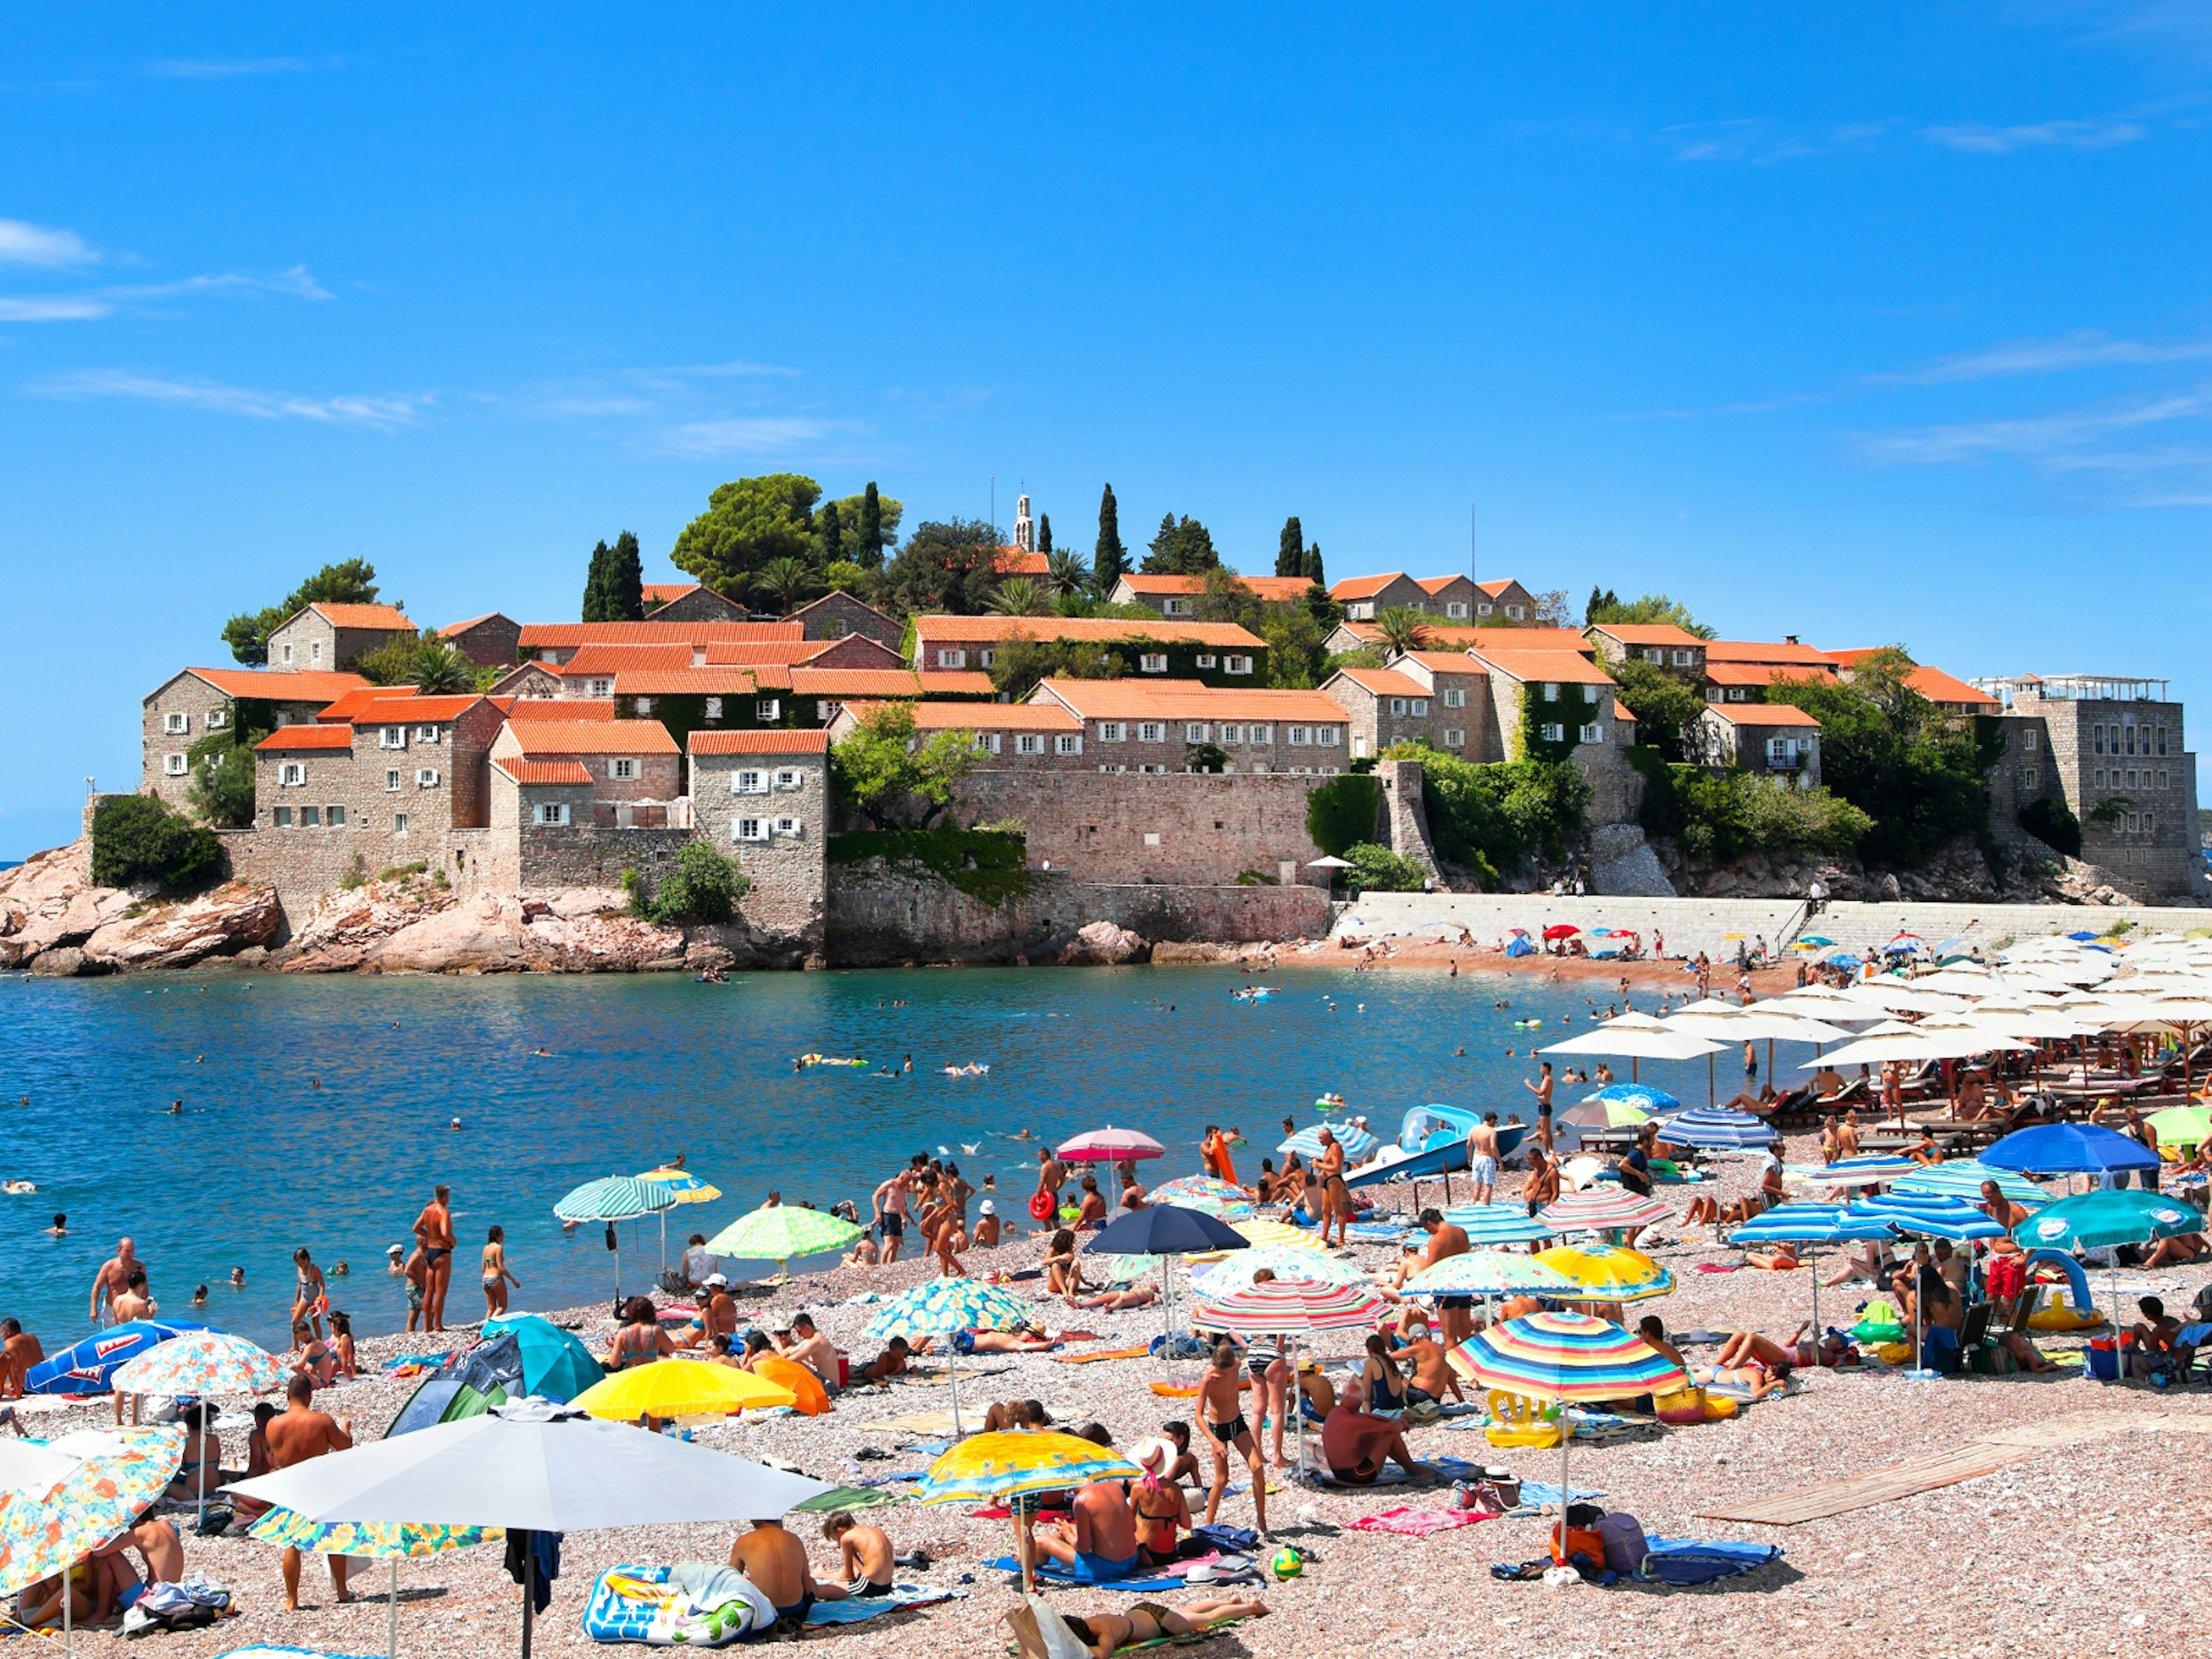 Gorgeous views of Sveti Stefan from the pinkish sands at its southern end © photosmatic / Shutterstock